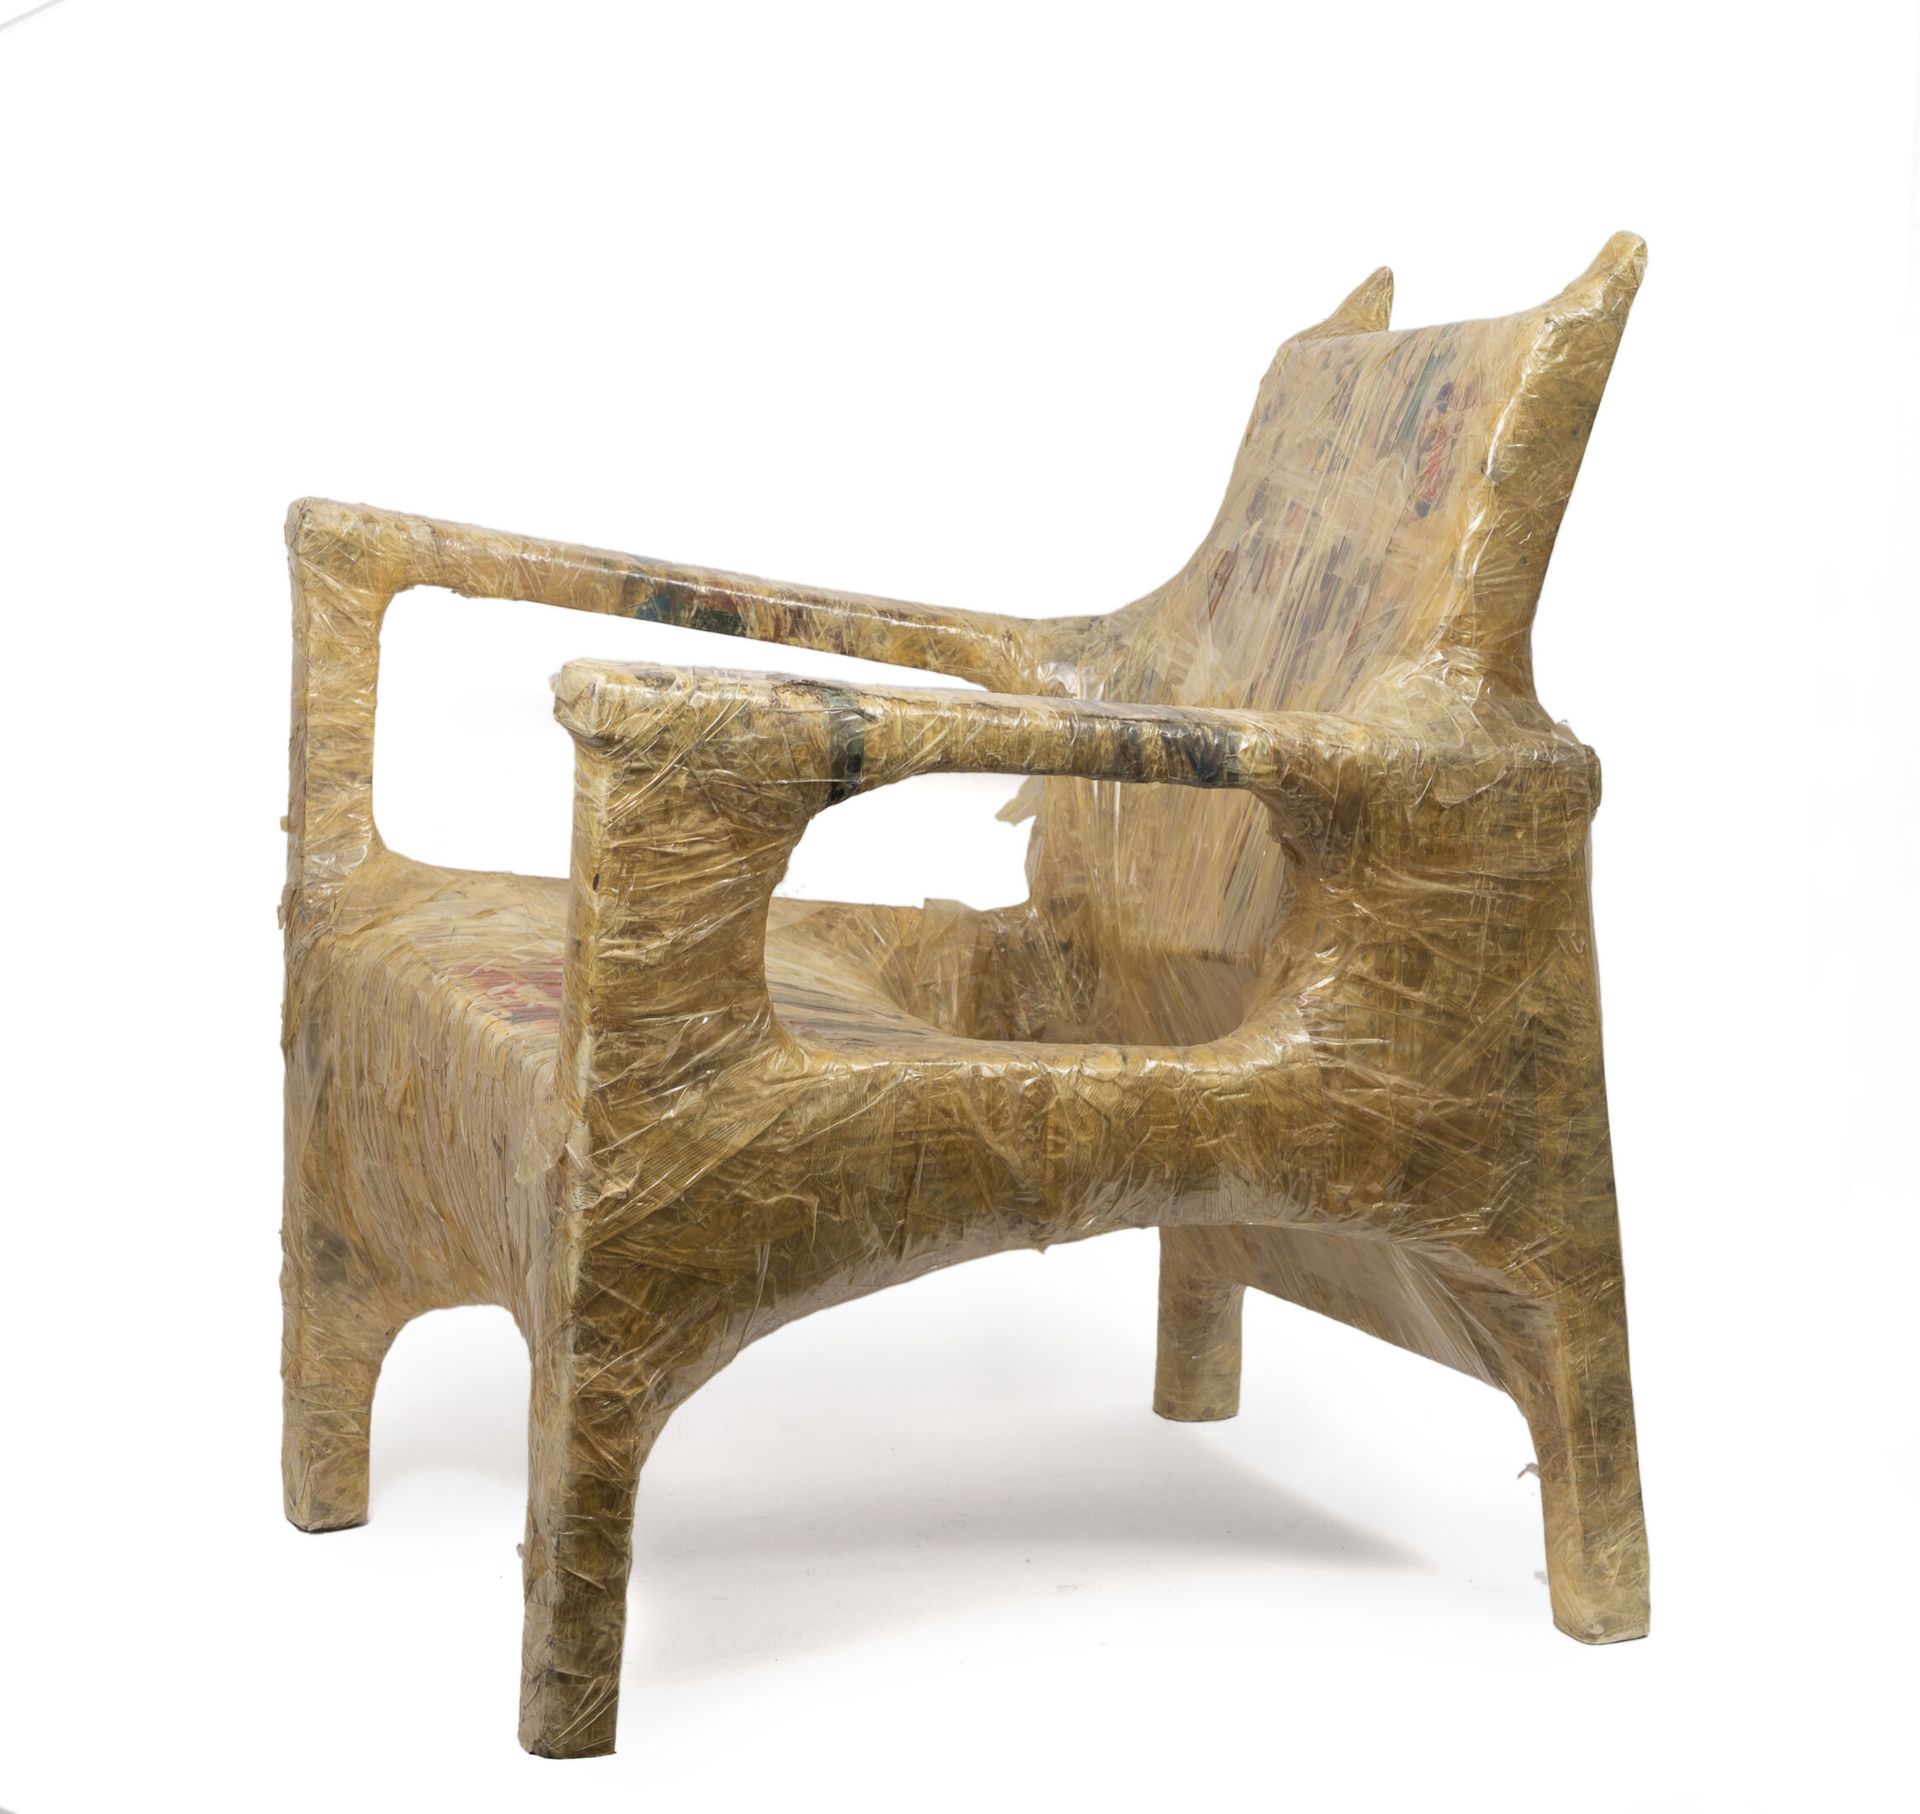 Robin GOLDRING (1963) Untitled, 1992-2011.

Armchair.

Mixed media.

Signed and &hellip;